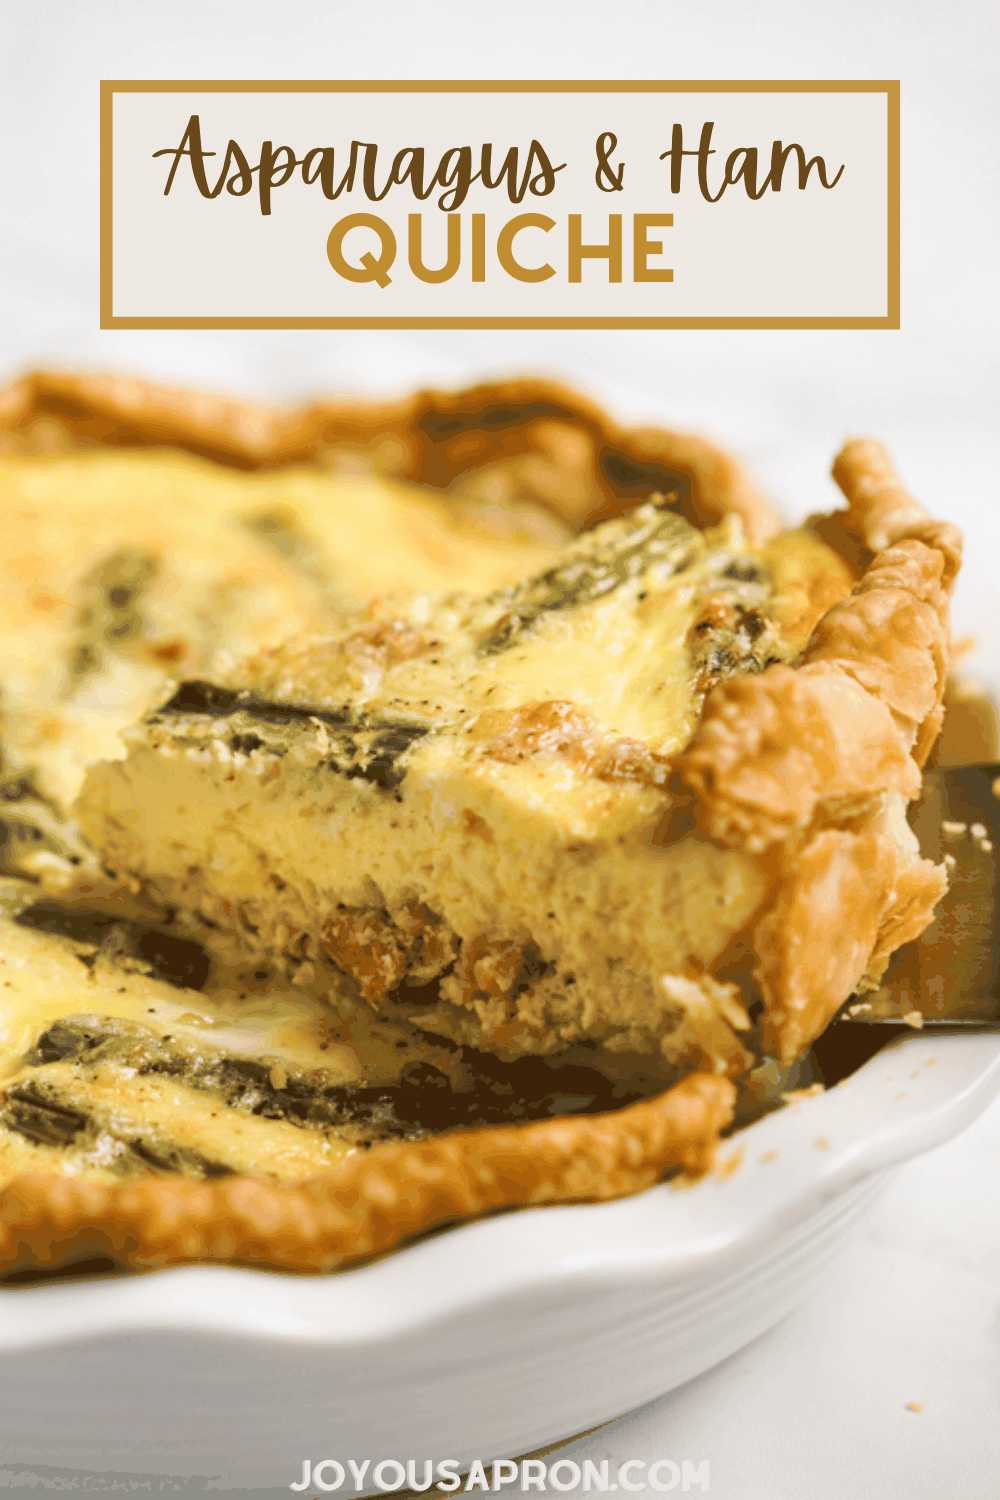 Asparagus and Ham Quiche - Great for Spring breakfast, brunch, lunch and dinner! Flaky pie crust loaded with asparagus, ham, gruyere cheese and egg mixture, baked to perfection! via @joyousapron